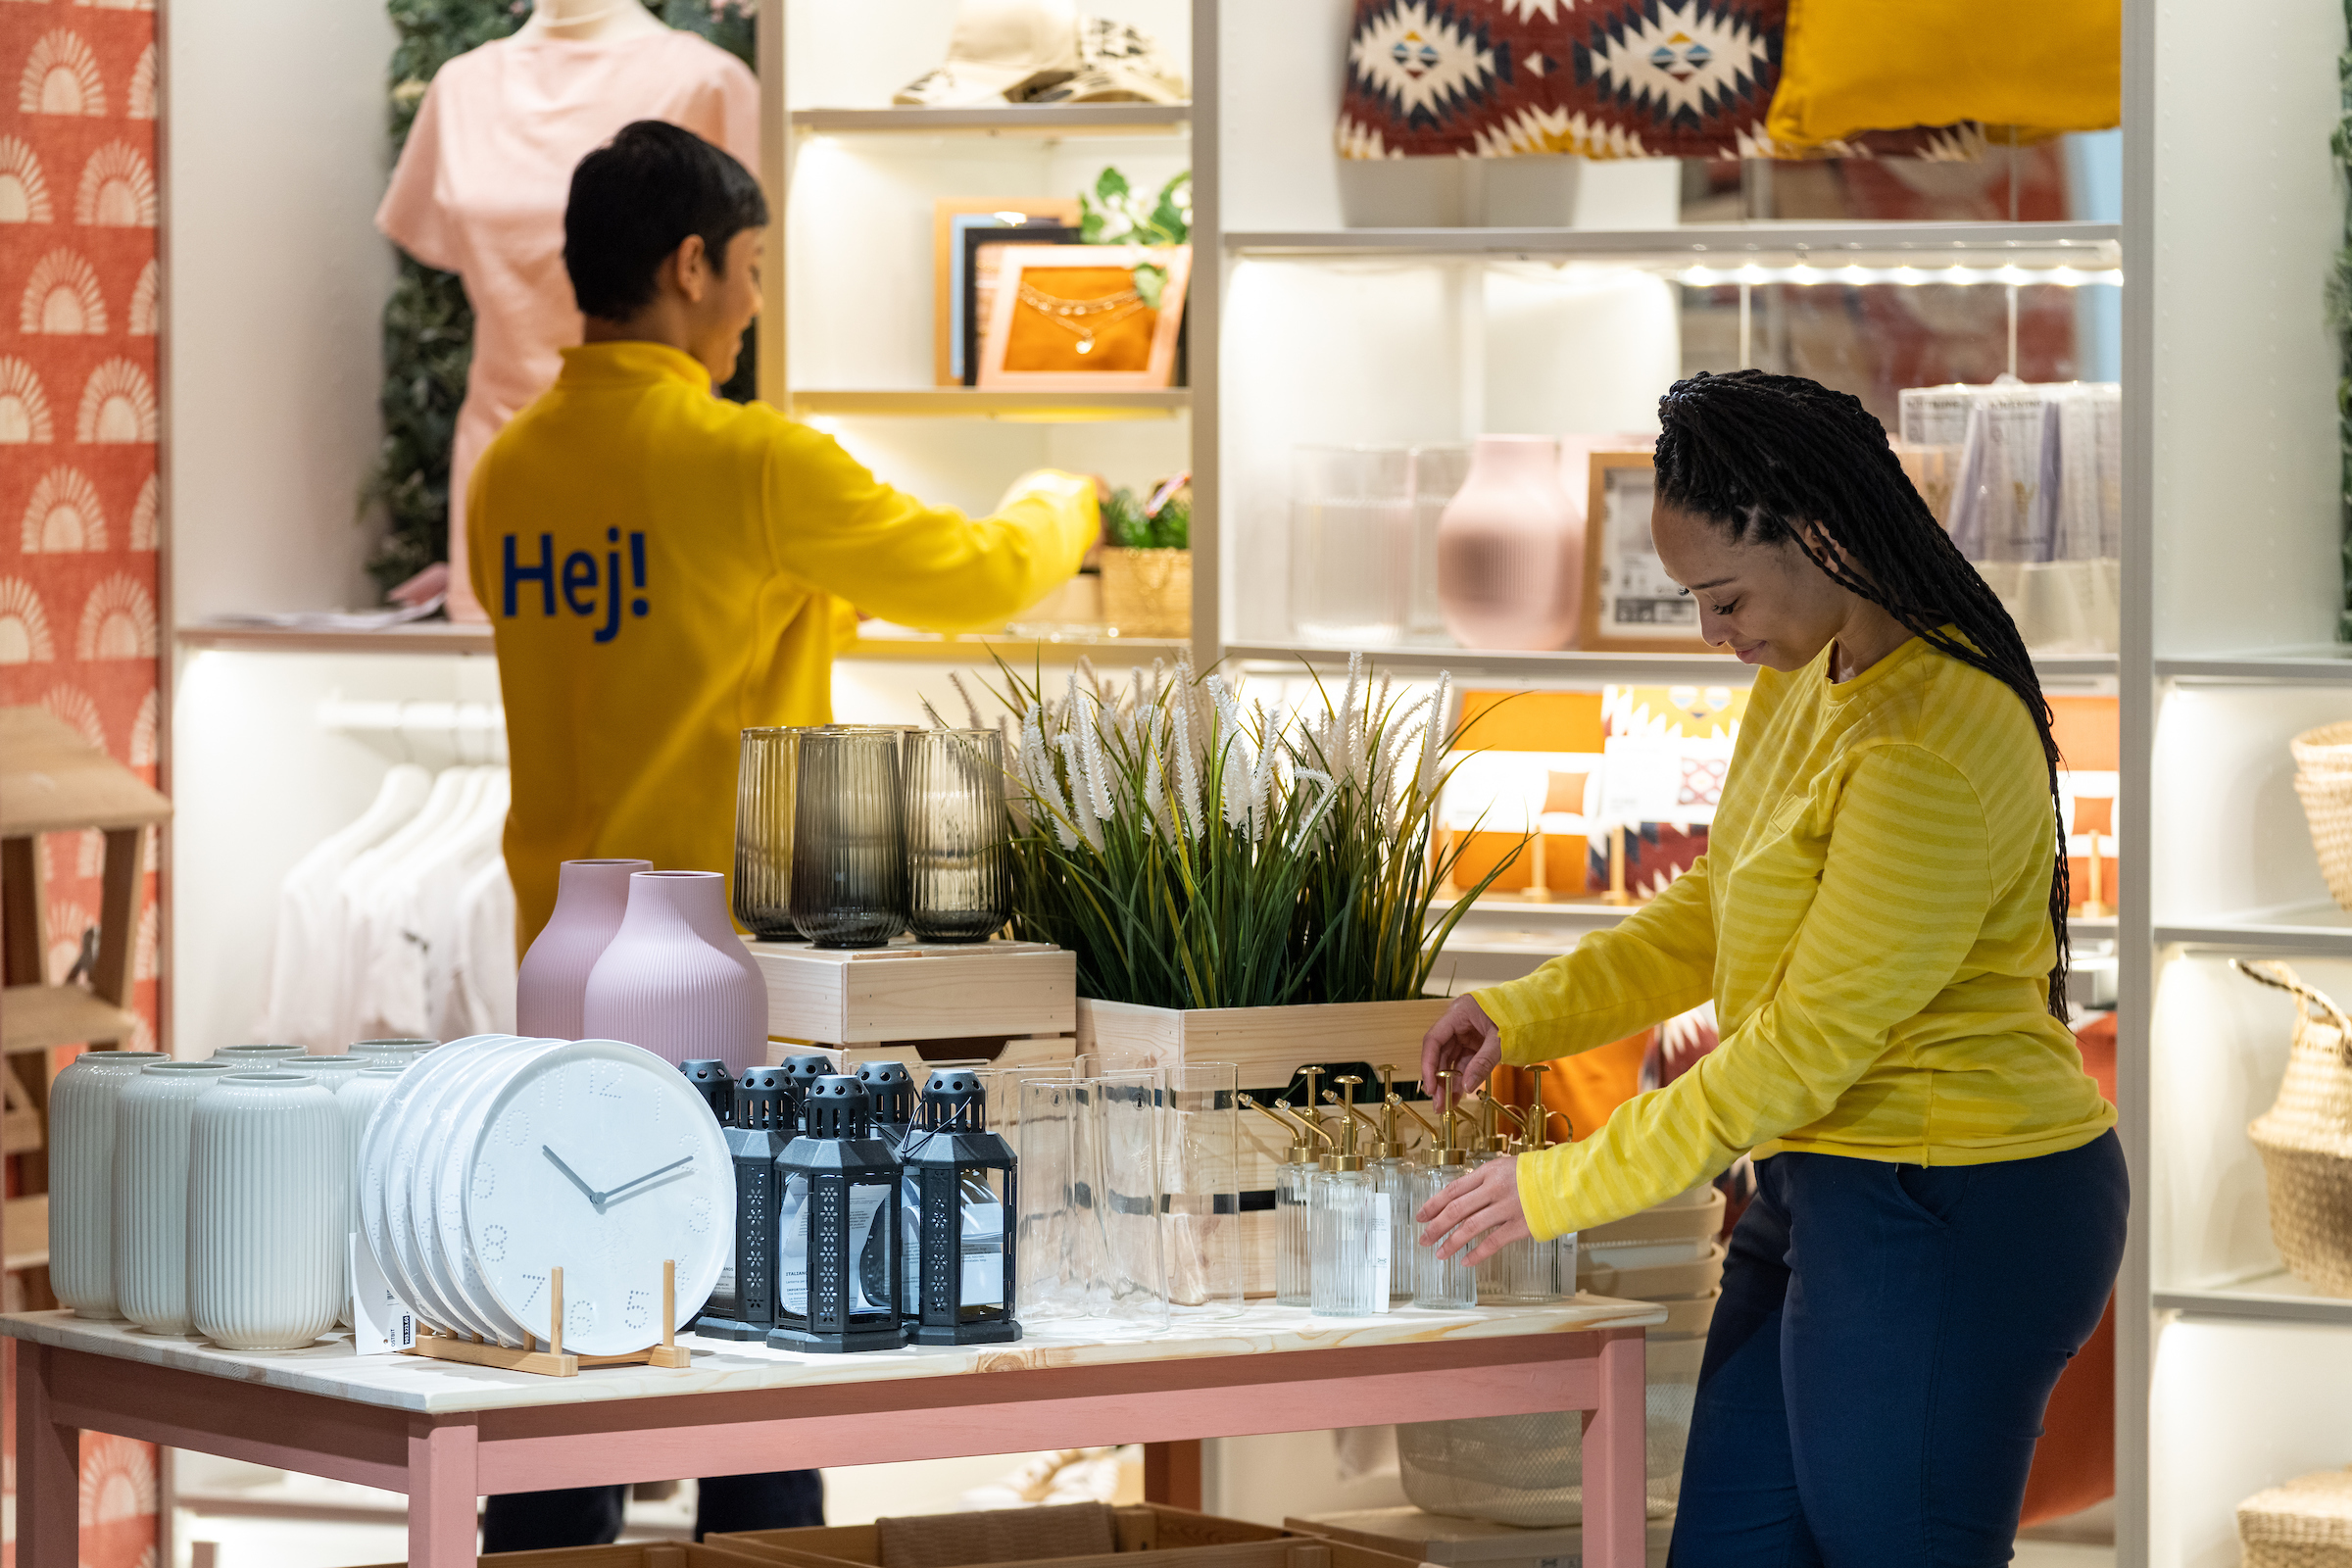 The Ikea store focuses on soft furnishings for urban living